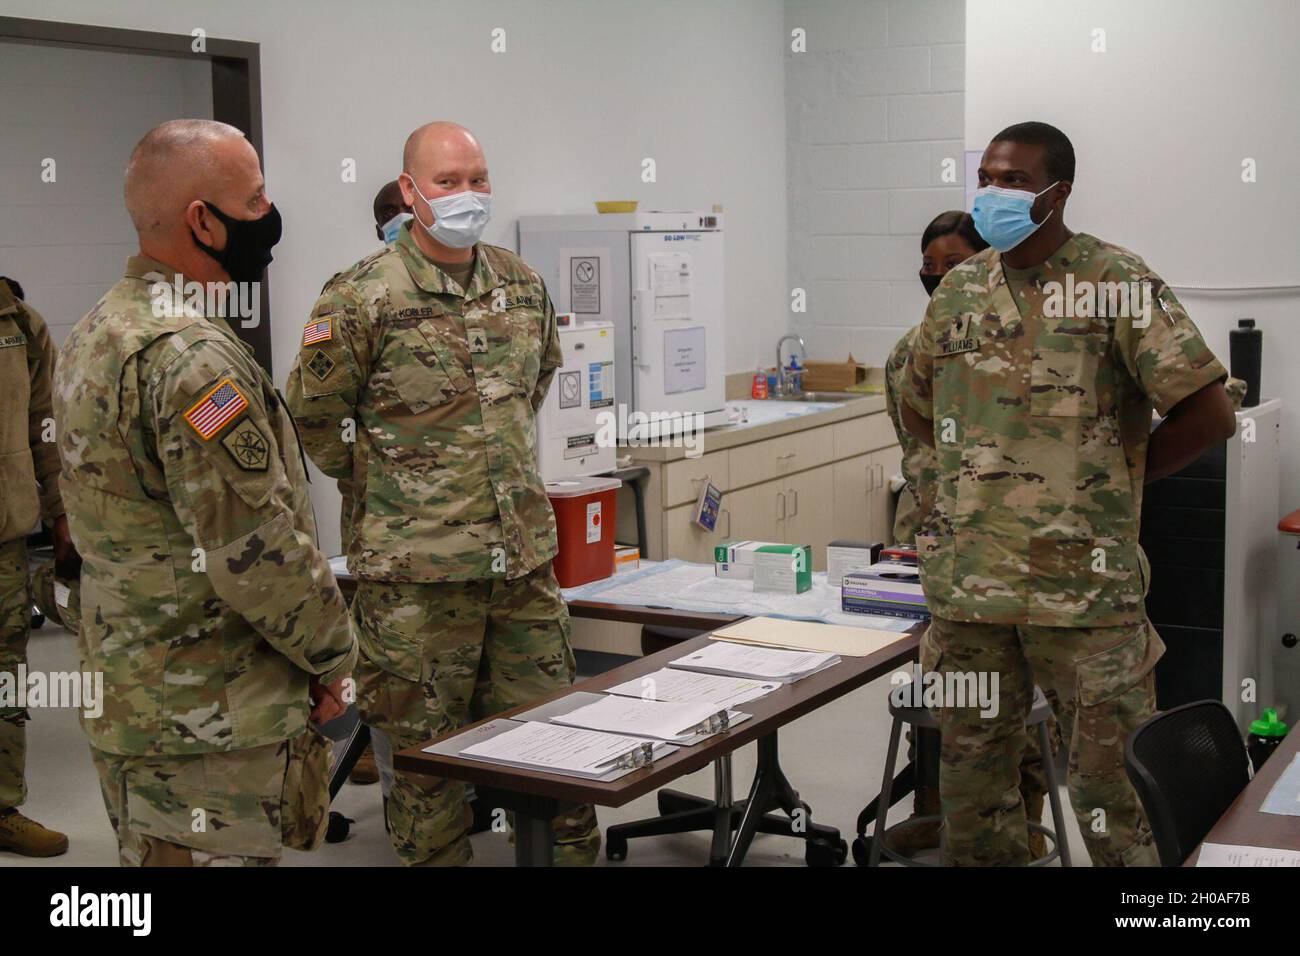 U.S. Army Soldier, Command Sgt. Maj. Jeff Logan, the State Sergeant major, Georgia National Guard addresses the medical Soldiers administrating the COVID-19 vaccine at Clay National Guard Center in Marietta, Georgia Jan. 9, 2021. Guardsmen and civilians on base volunteered to receive the vaccine in the effort to combat COVID-19. Stock Photo